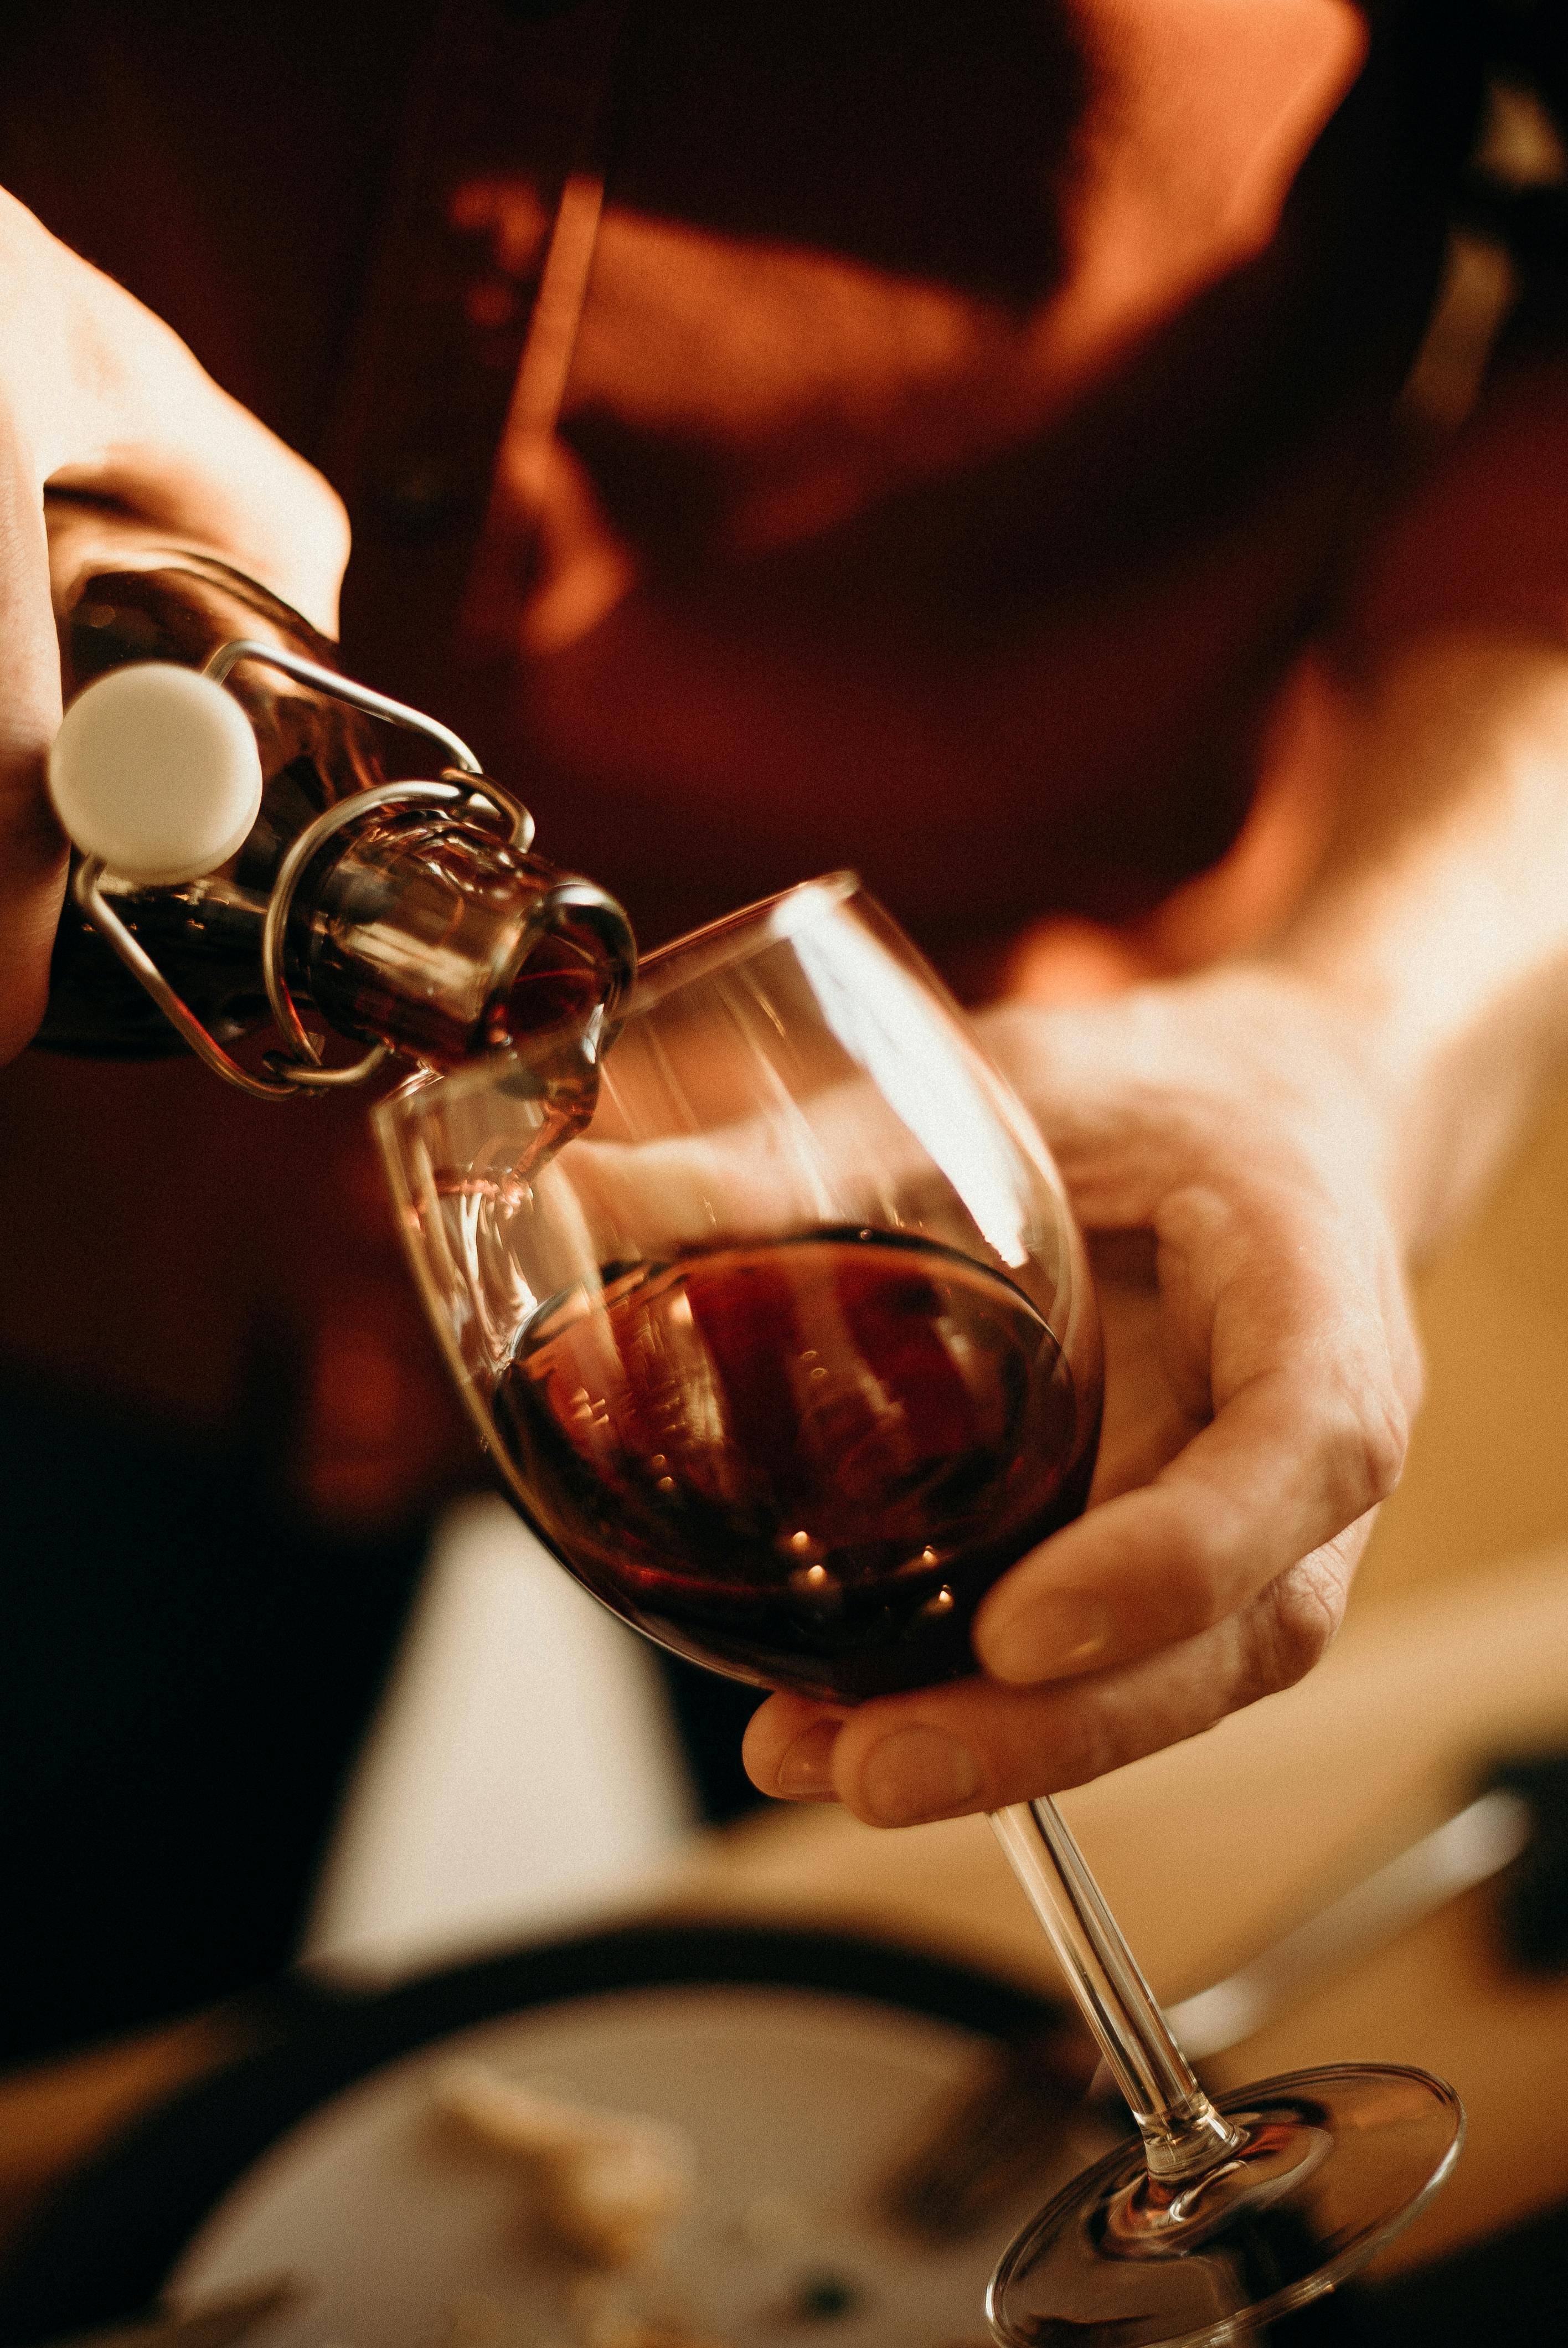 Best 100 Wine Pictures HQ  Download Free Images on Unsplash